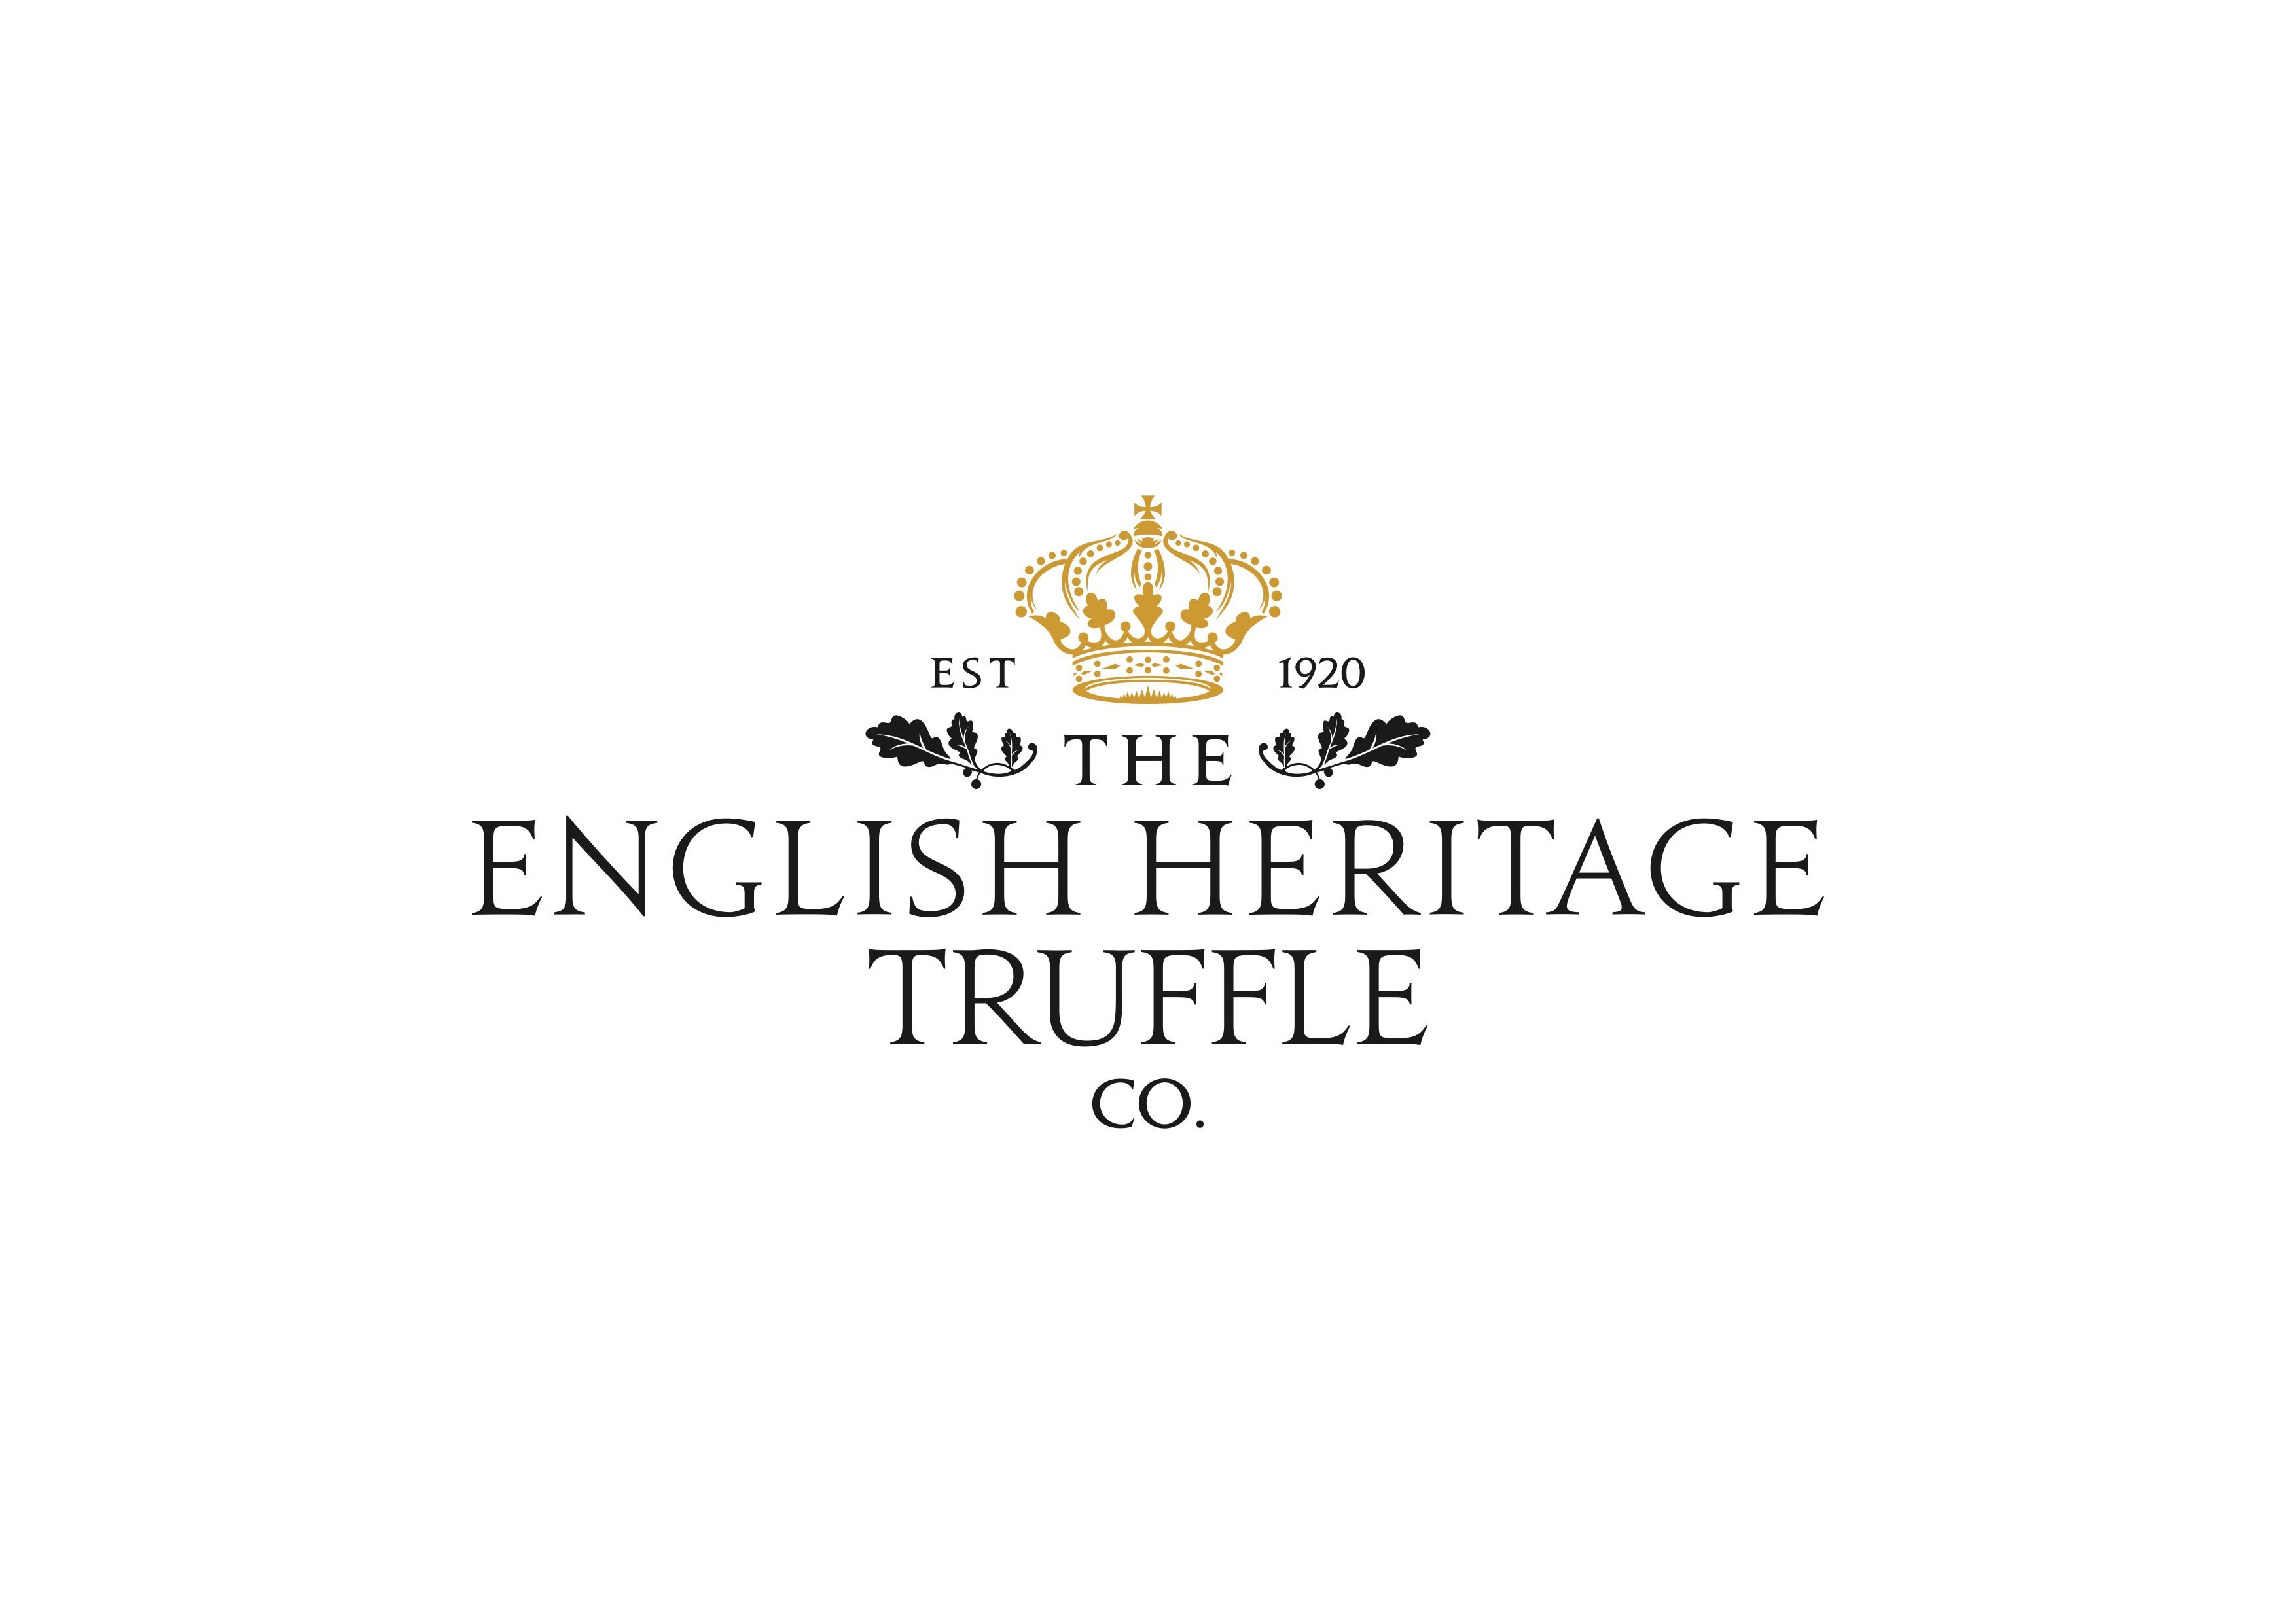 FOR ALL OF OUR YOUR TRUFFLE NEEDS
For a special occasion or you are looking for a long term supply? Our team is on hand to help fulfil your needs.